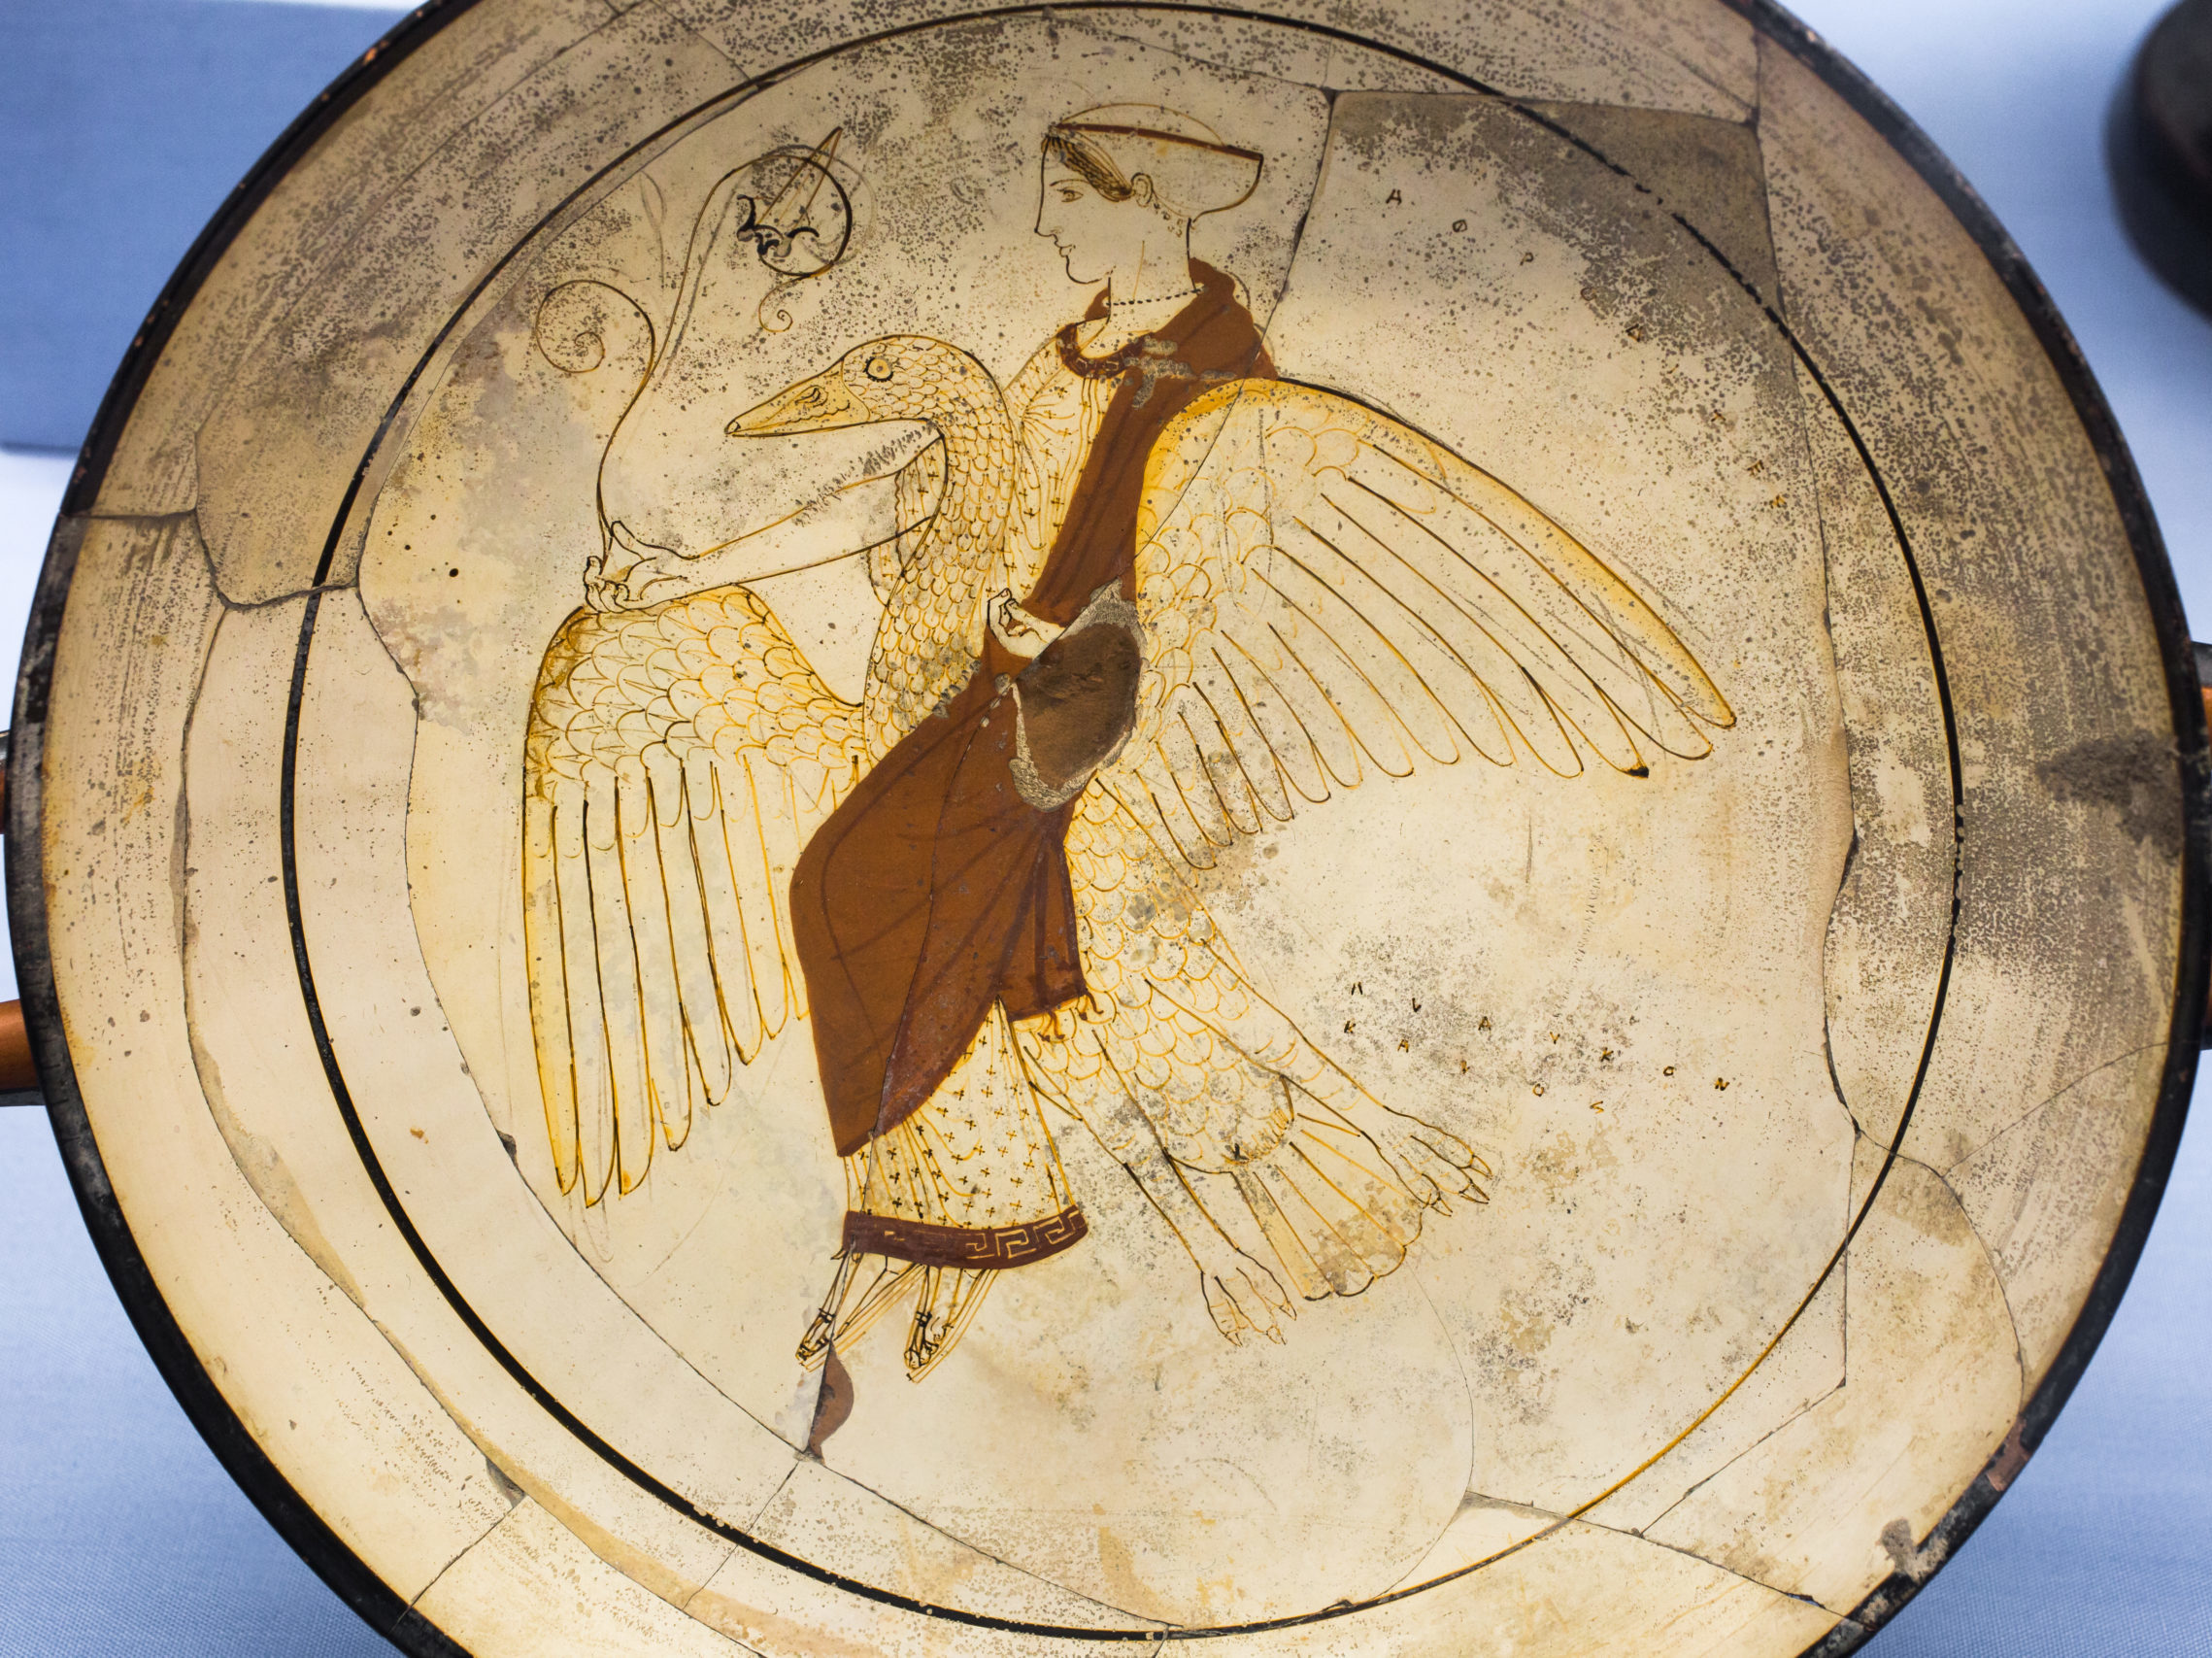 A white-ground red-figure kylix depicting Aphrodite riding a swan. Aphrodite is wearing a long dress and a headdress, and a flower is growing from her hand.